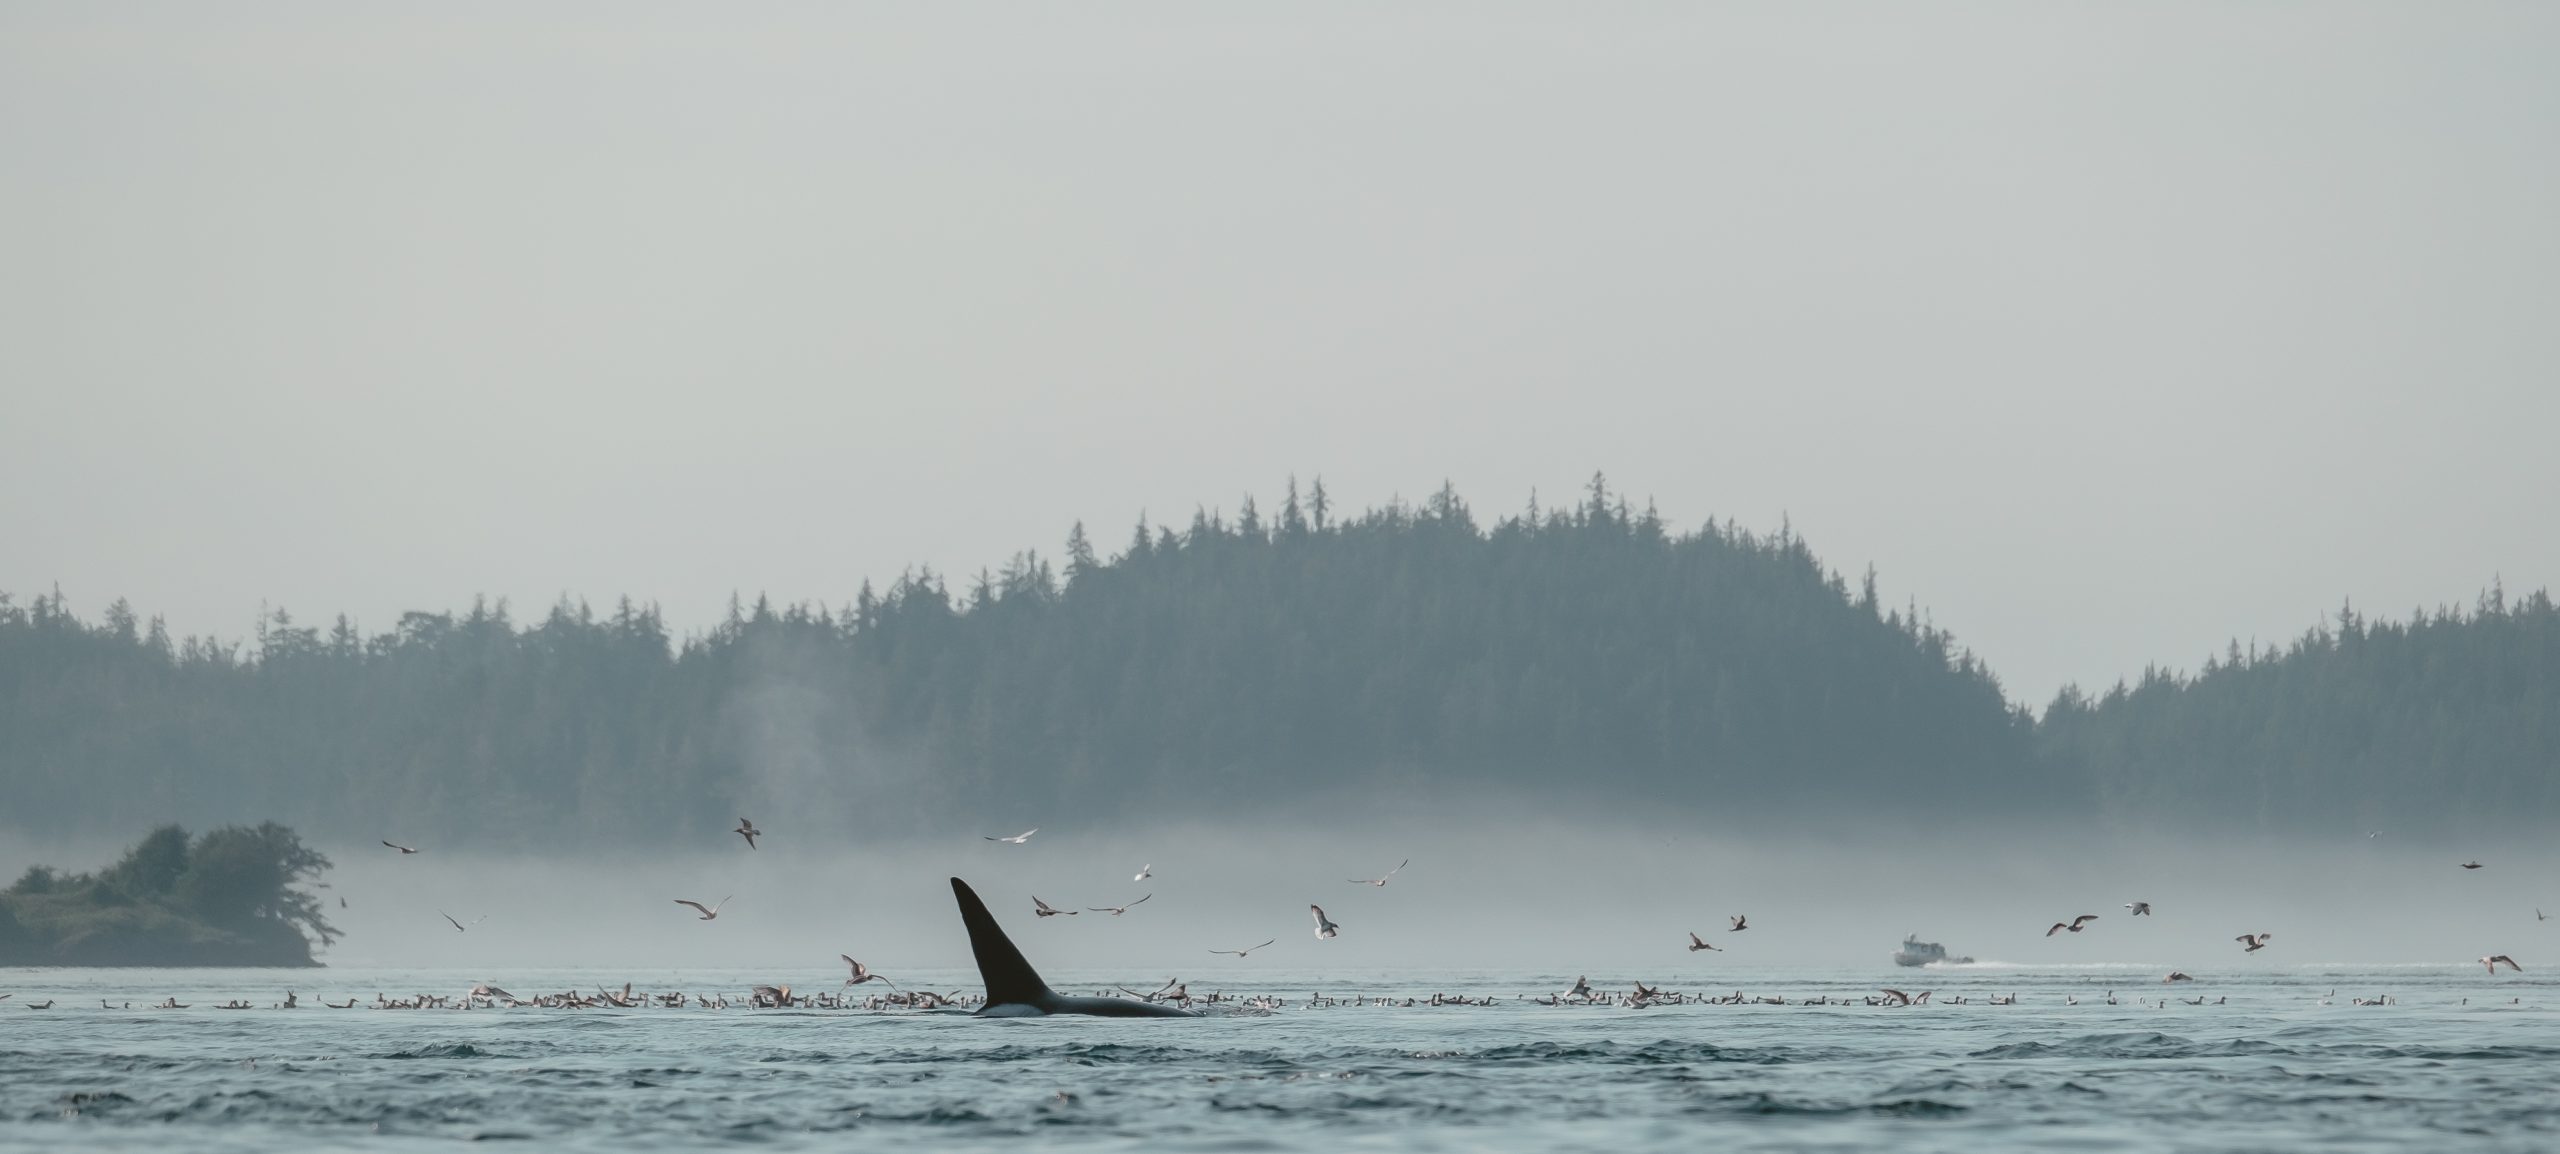 Orca Fin Appears out of Water with Seabirds Surrounding in Coastal BC